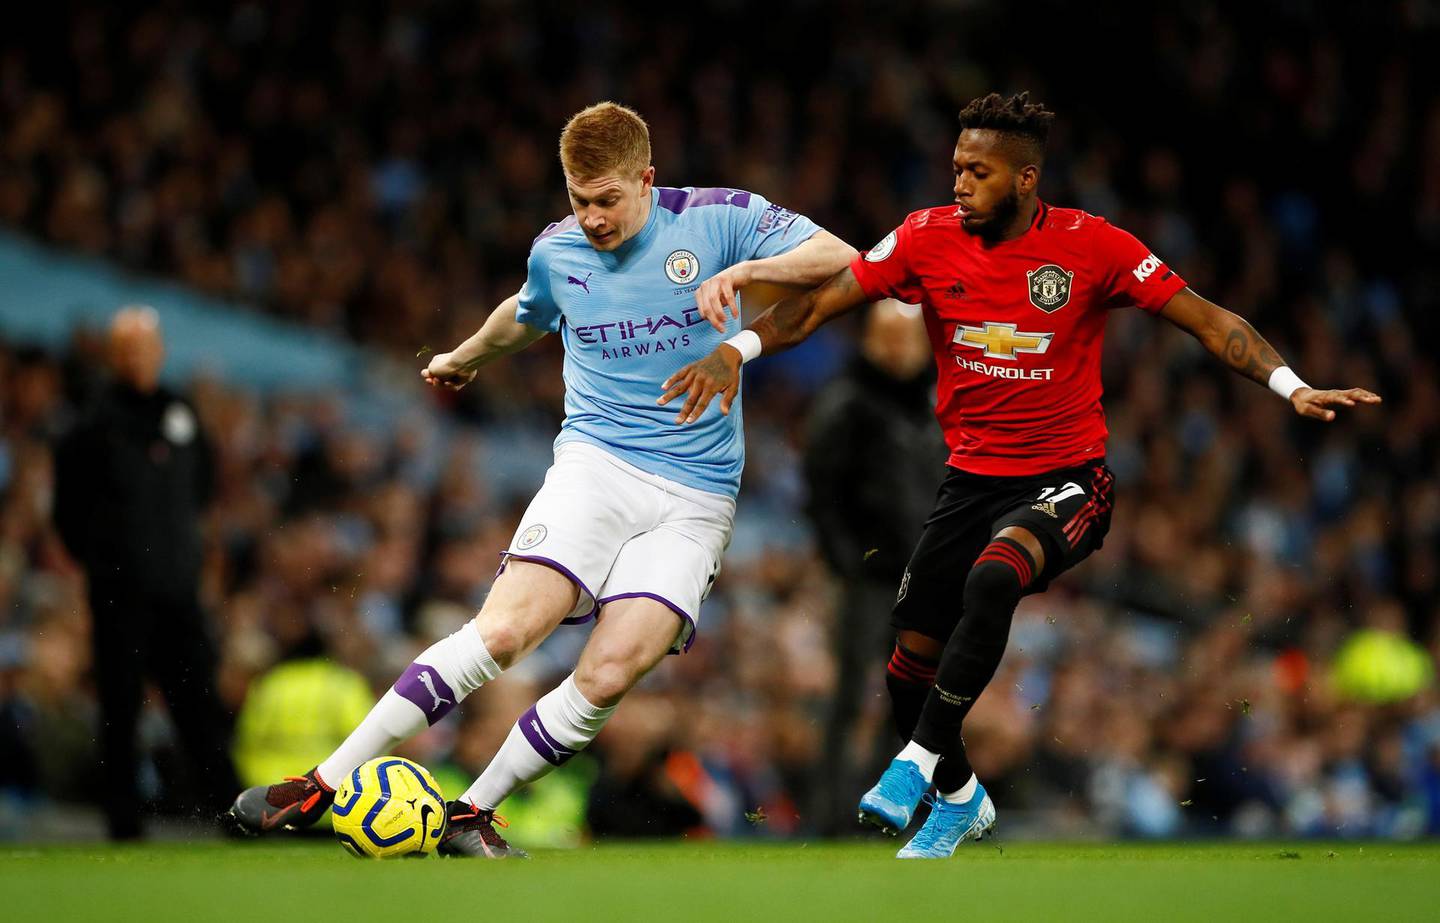 Soccer Football - Premier League - Manchester City v Manchester United - Etihad Stadium, Manchester, Britain - December 7, 2019  Manchester City's Kevin De Bruyne in action with Manchester United's Fred  Action Images via Reuters/Jason Cairnduff  EDITORIAL USE ONLY. No use with unauthorized audio, video, data, fixture lists, club/league logos or "live" services. Online in-match use limited to 75 images, no video emulation. No use in betting, games or single club/league/player publications.  Please contact your account representative for further details.